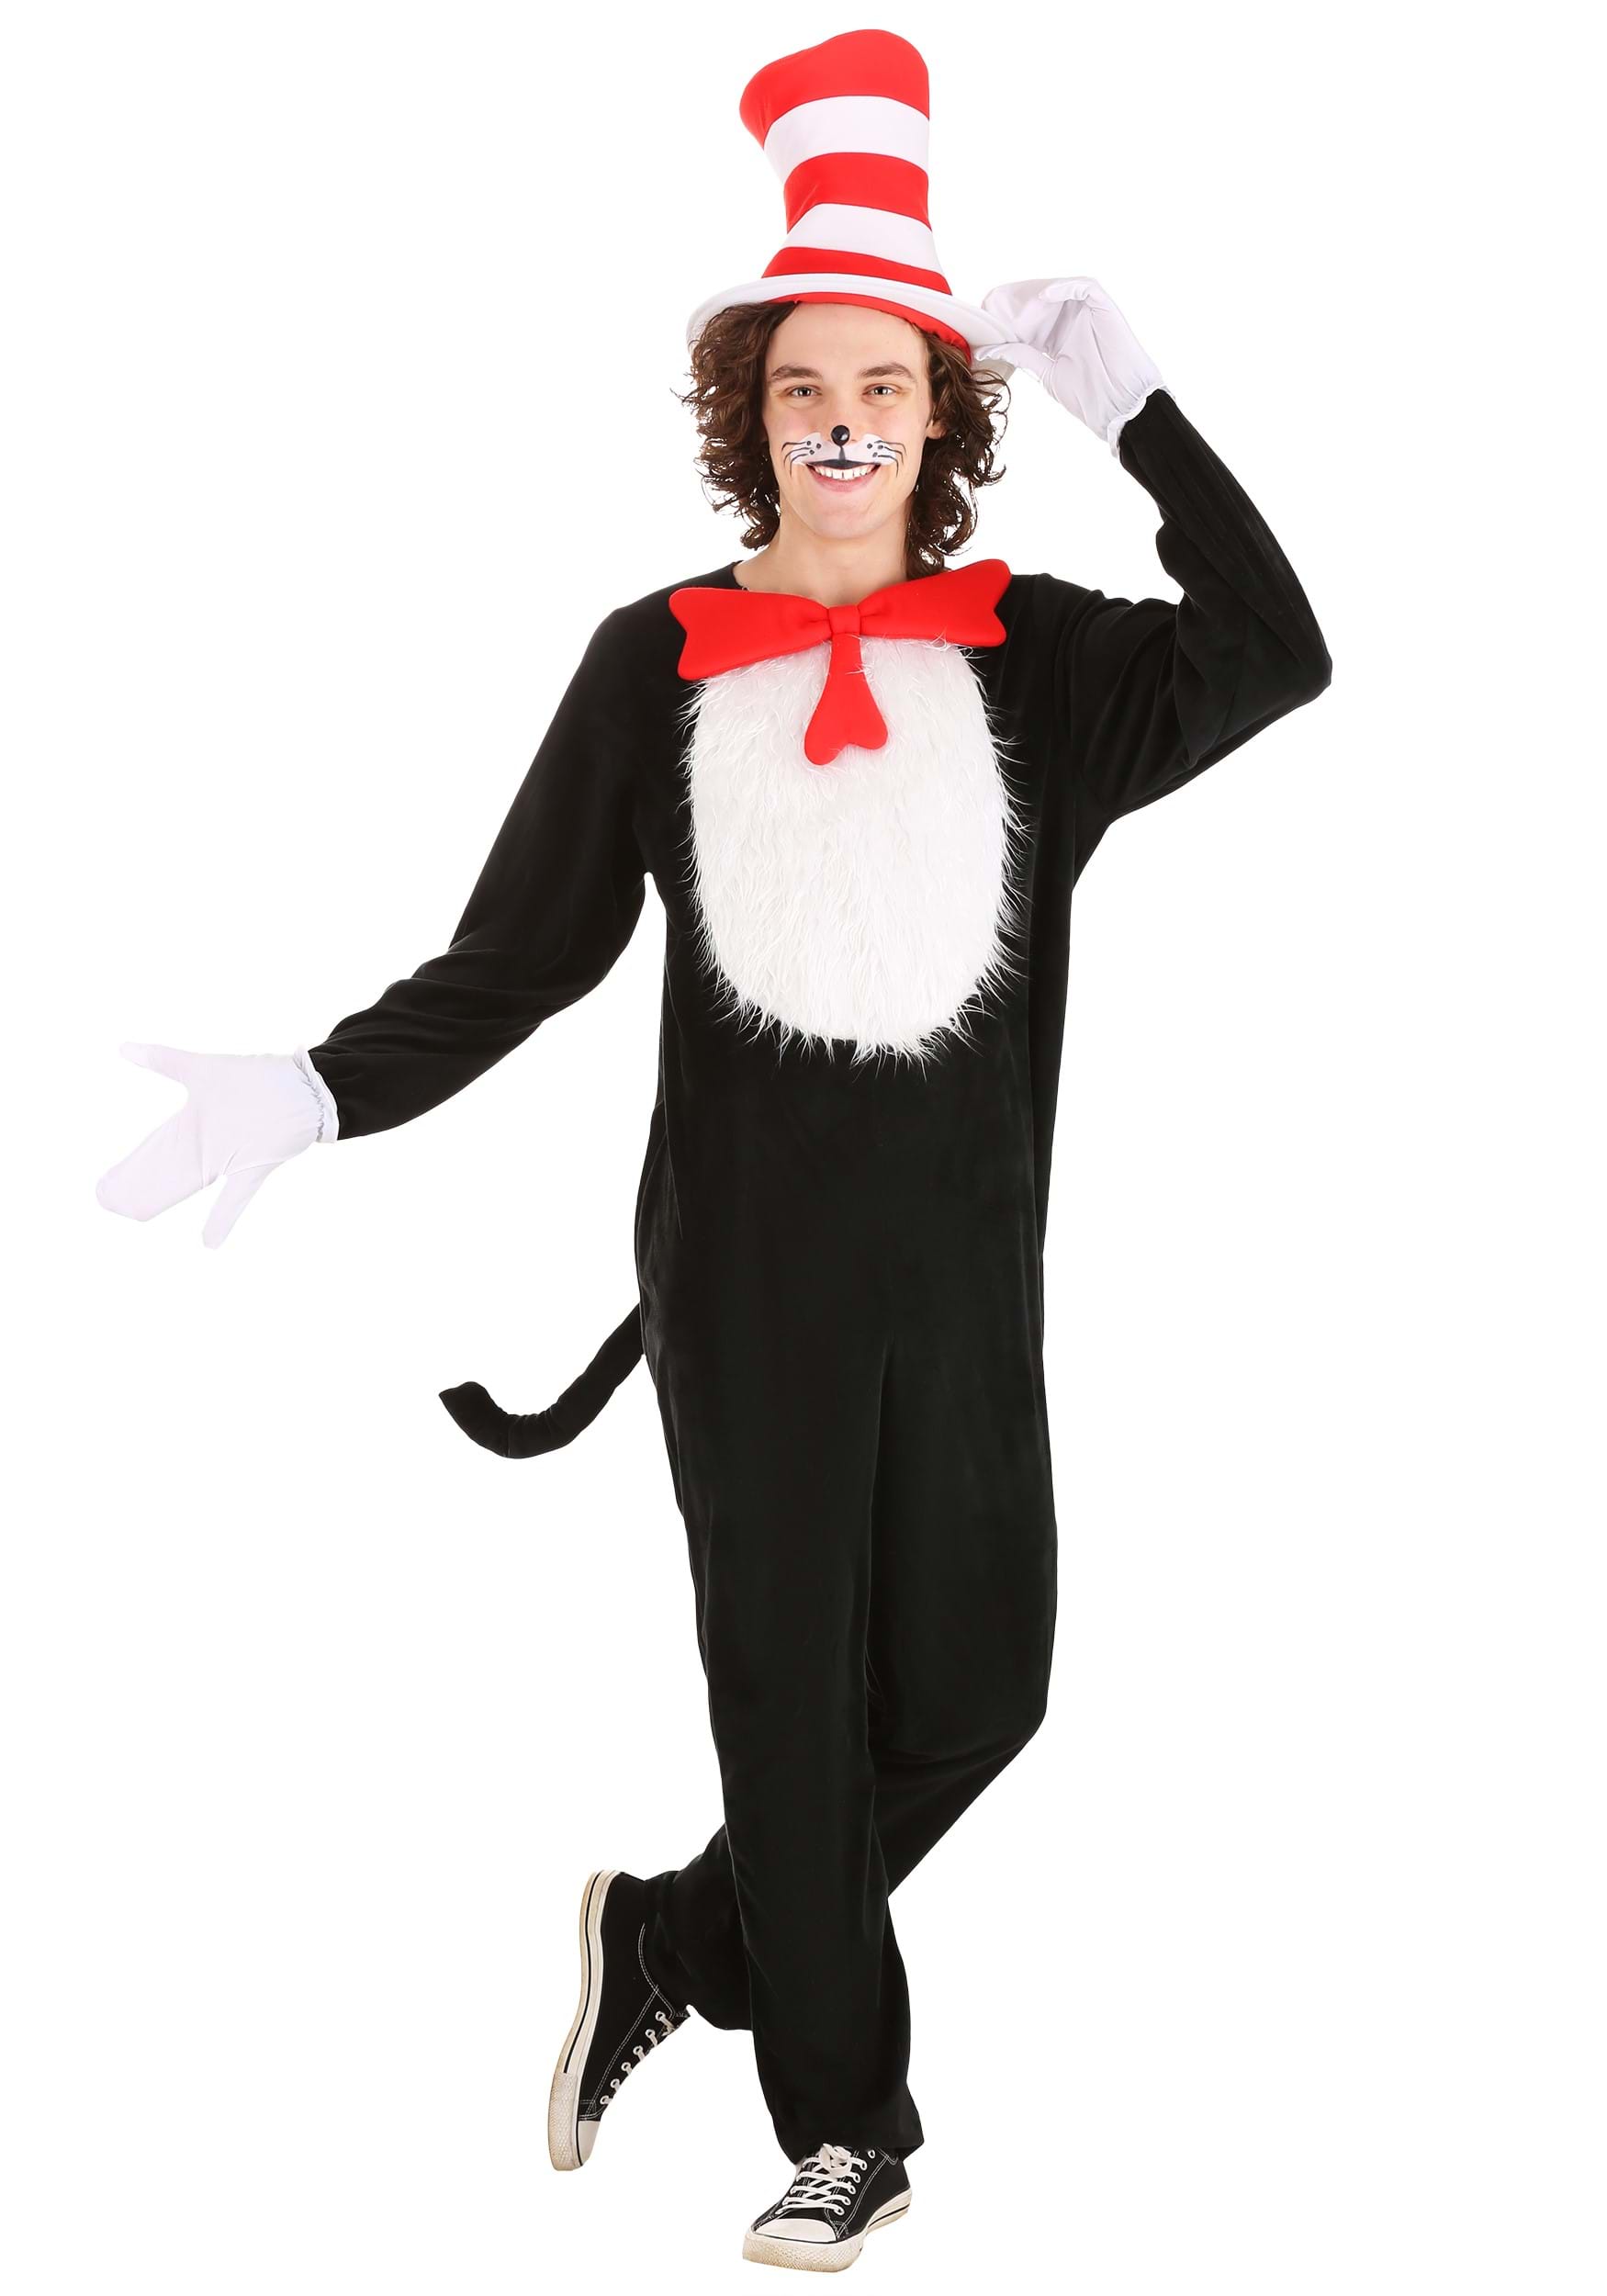 Photos - Fancy Dress CATerpillar FUN Costumes Plus Size Cat in the Hat Adult Costume Black/Red/Whit 